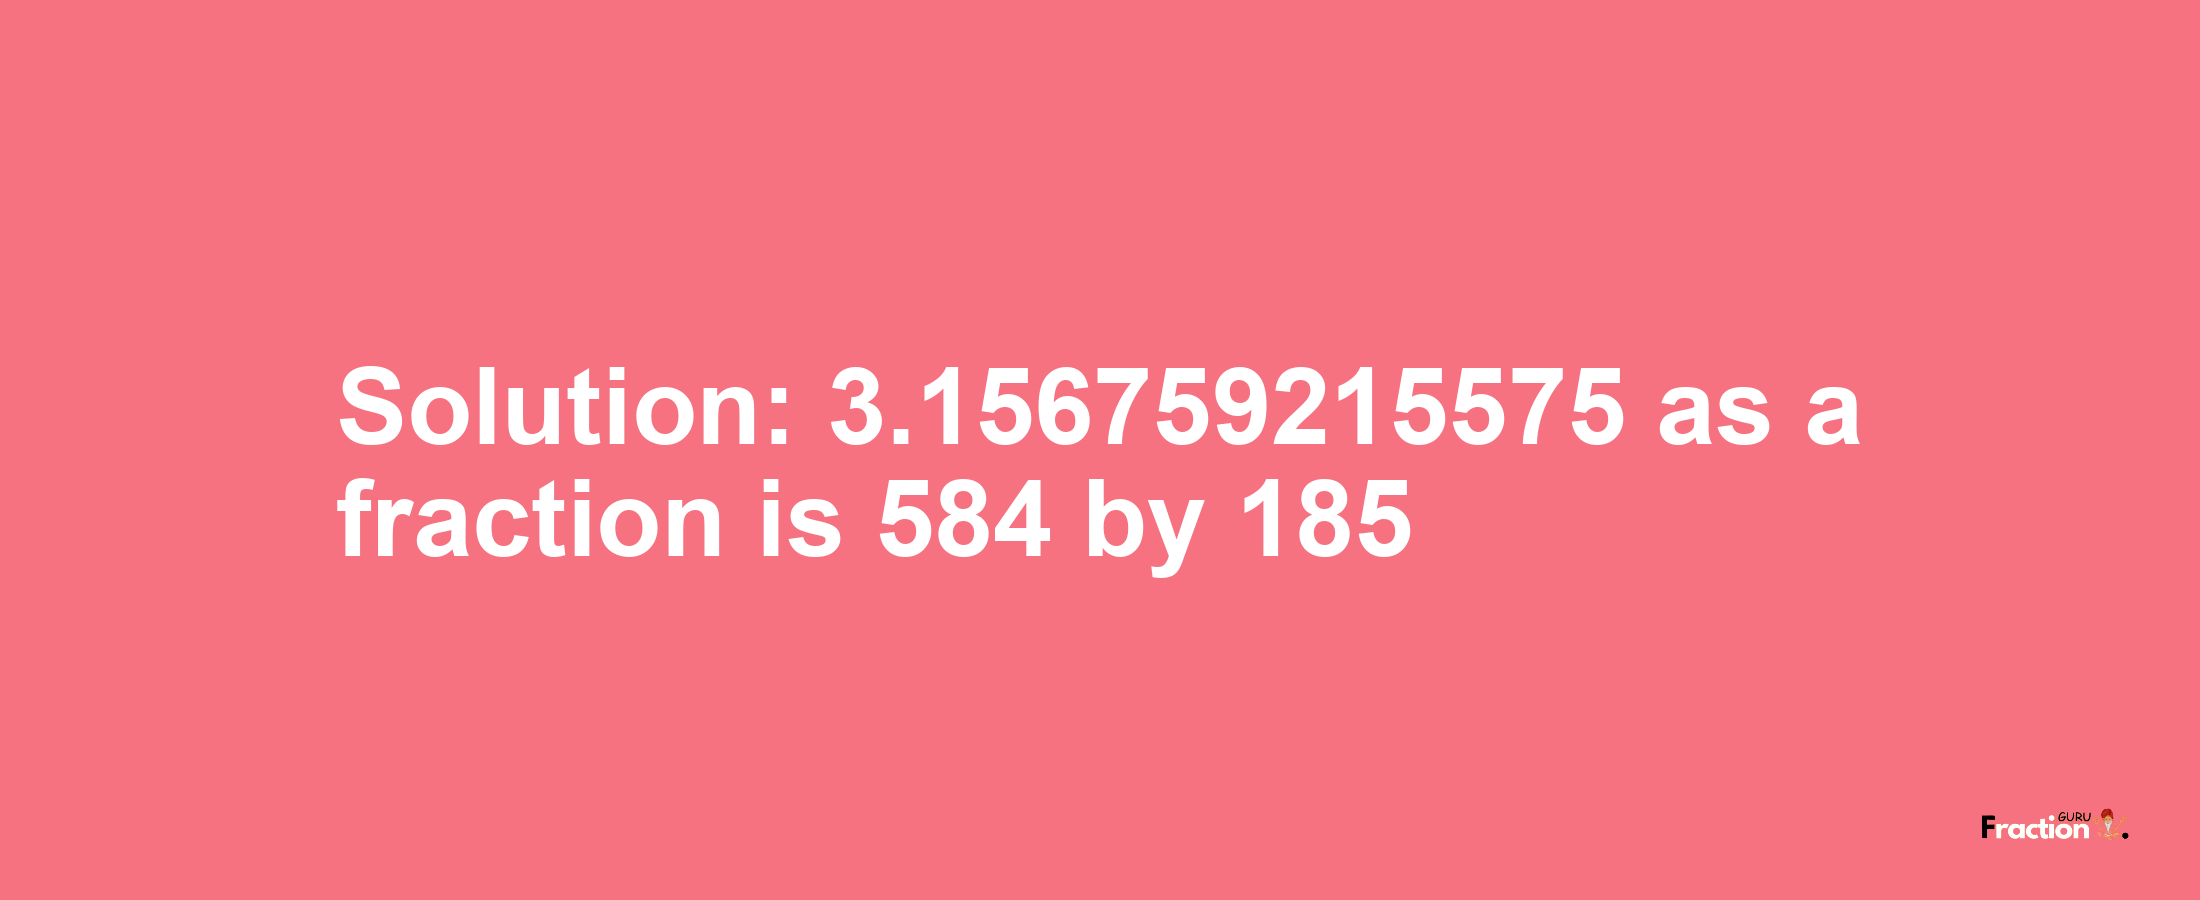 Solution:3.156759215575 as a fraction is 584/185